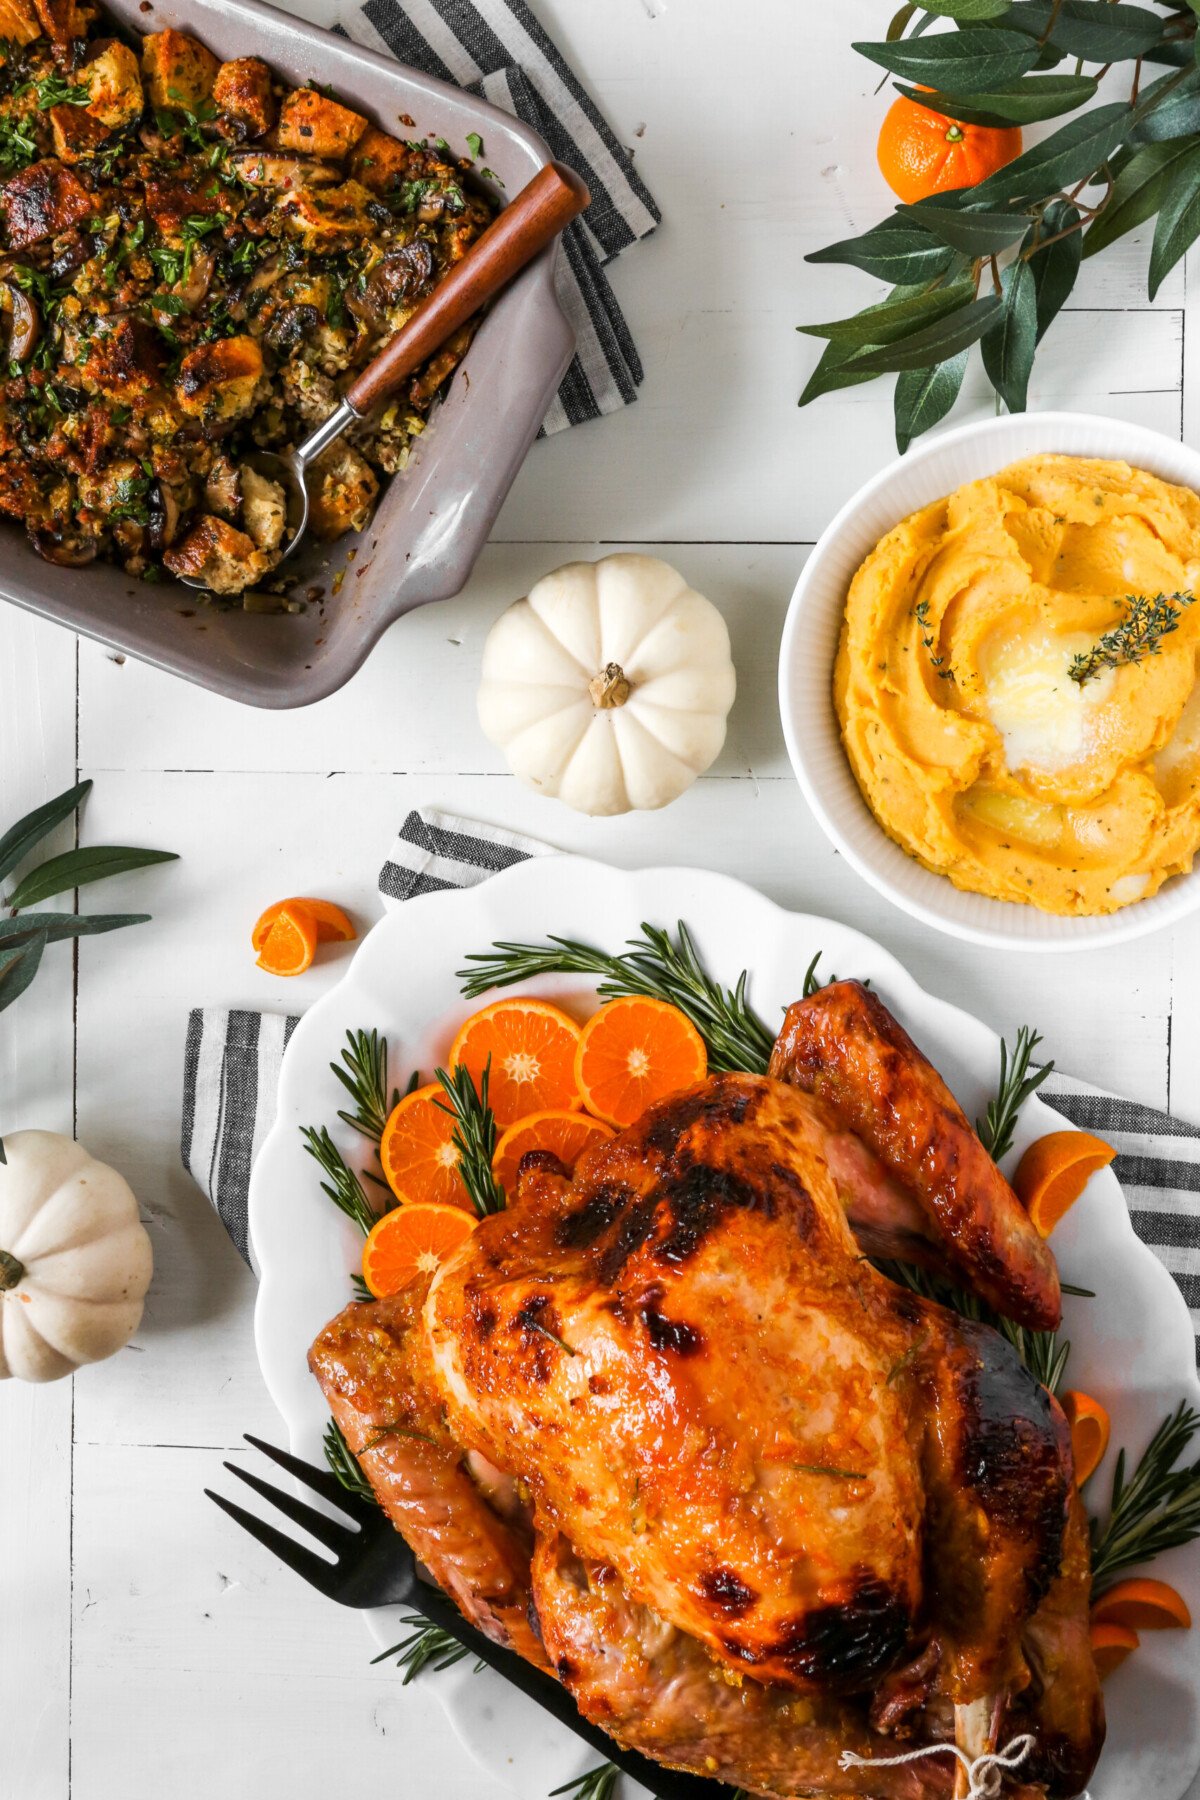 photograph of a Thanksgiving table scape and meal with a glazed roast turkey, stuffing, and mashed potatoes